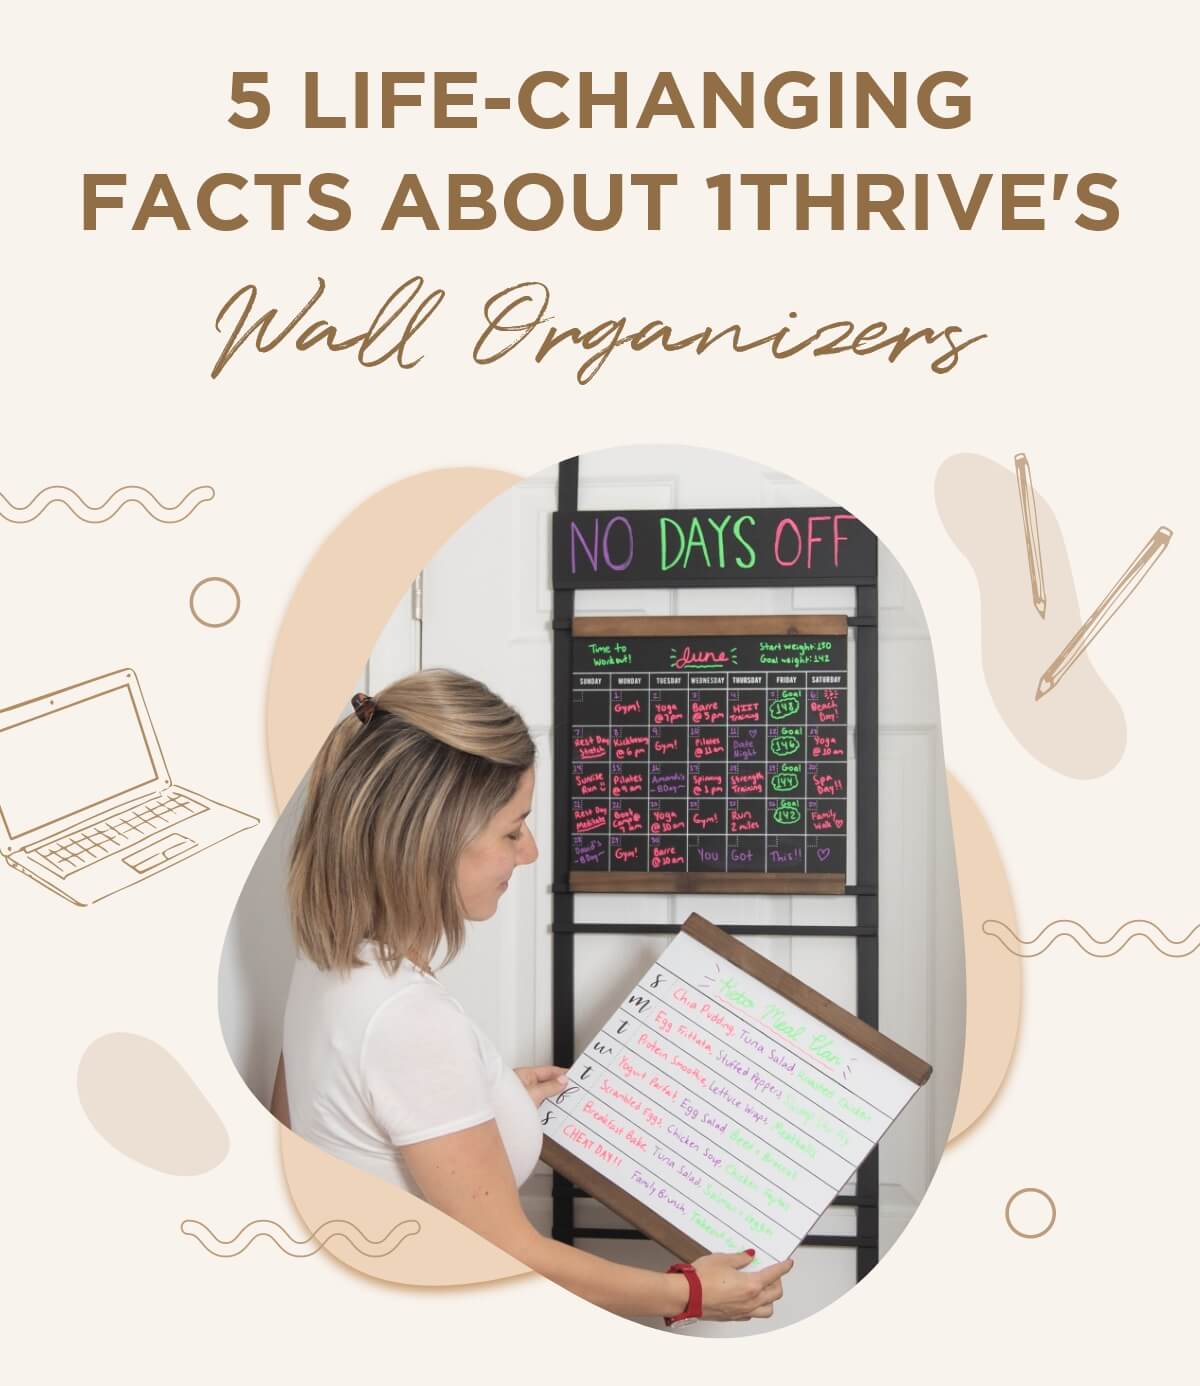 5 Life-Changing Facts About 1THRIVE's Wall Organizers